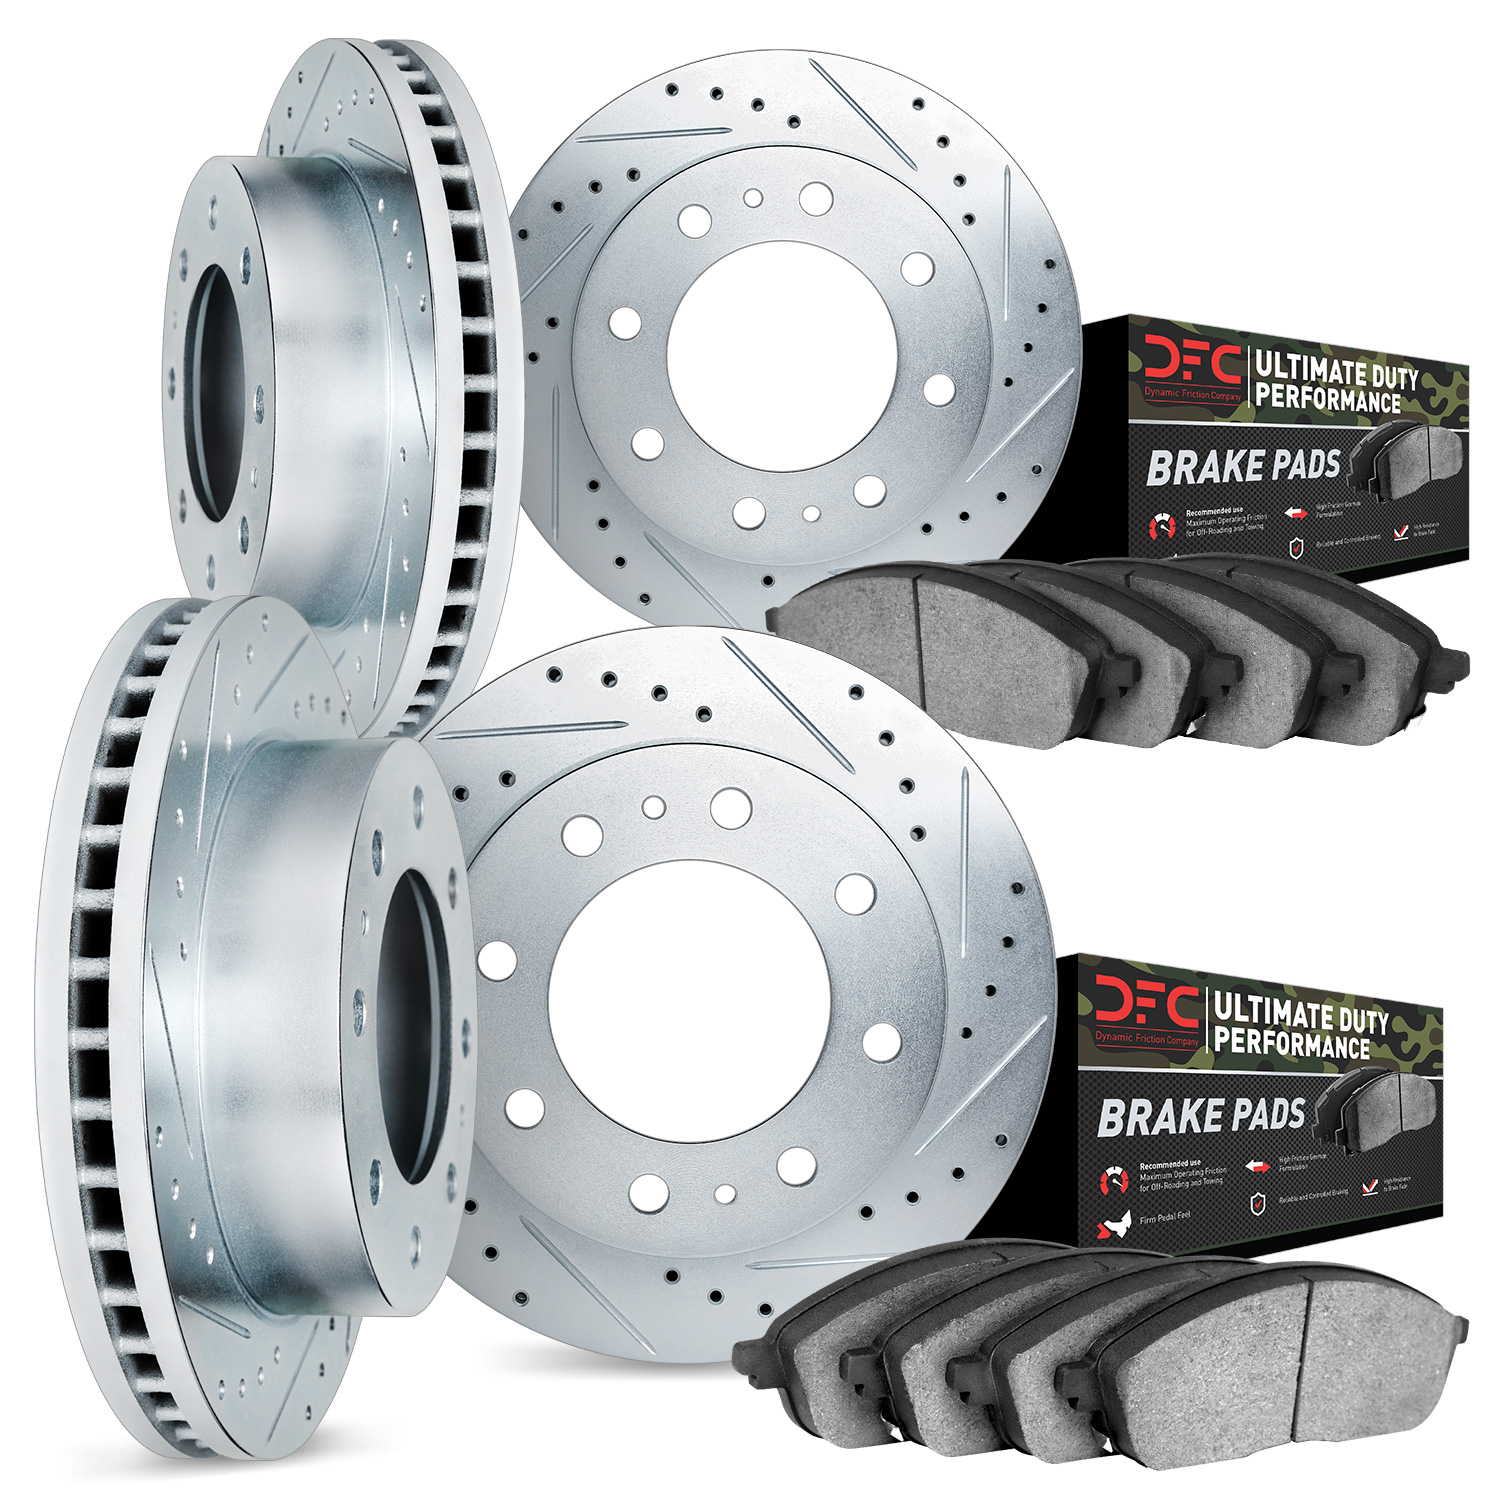 7404-54051 Drilled/Slotted Brake Rotors with Ultimate-Duty Brake Pads Kit [Silver], Fits Select Ford/Lincoln/Mercury/Mazda, Posi